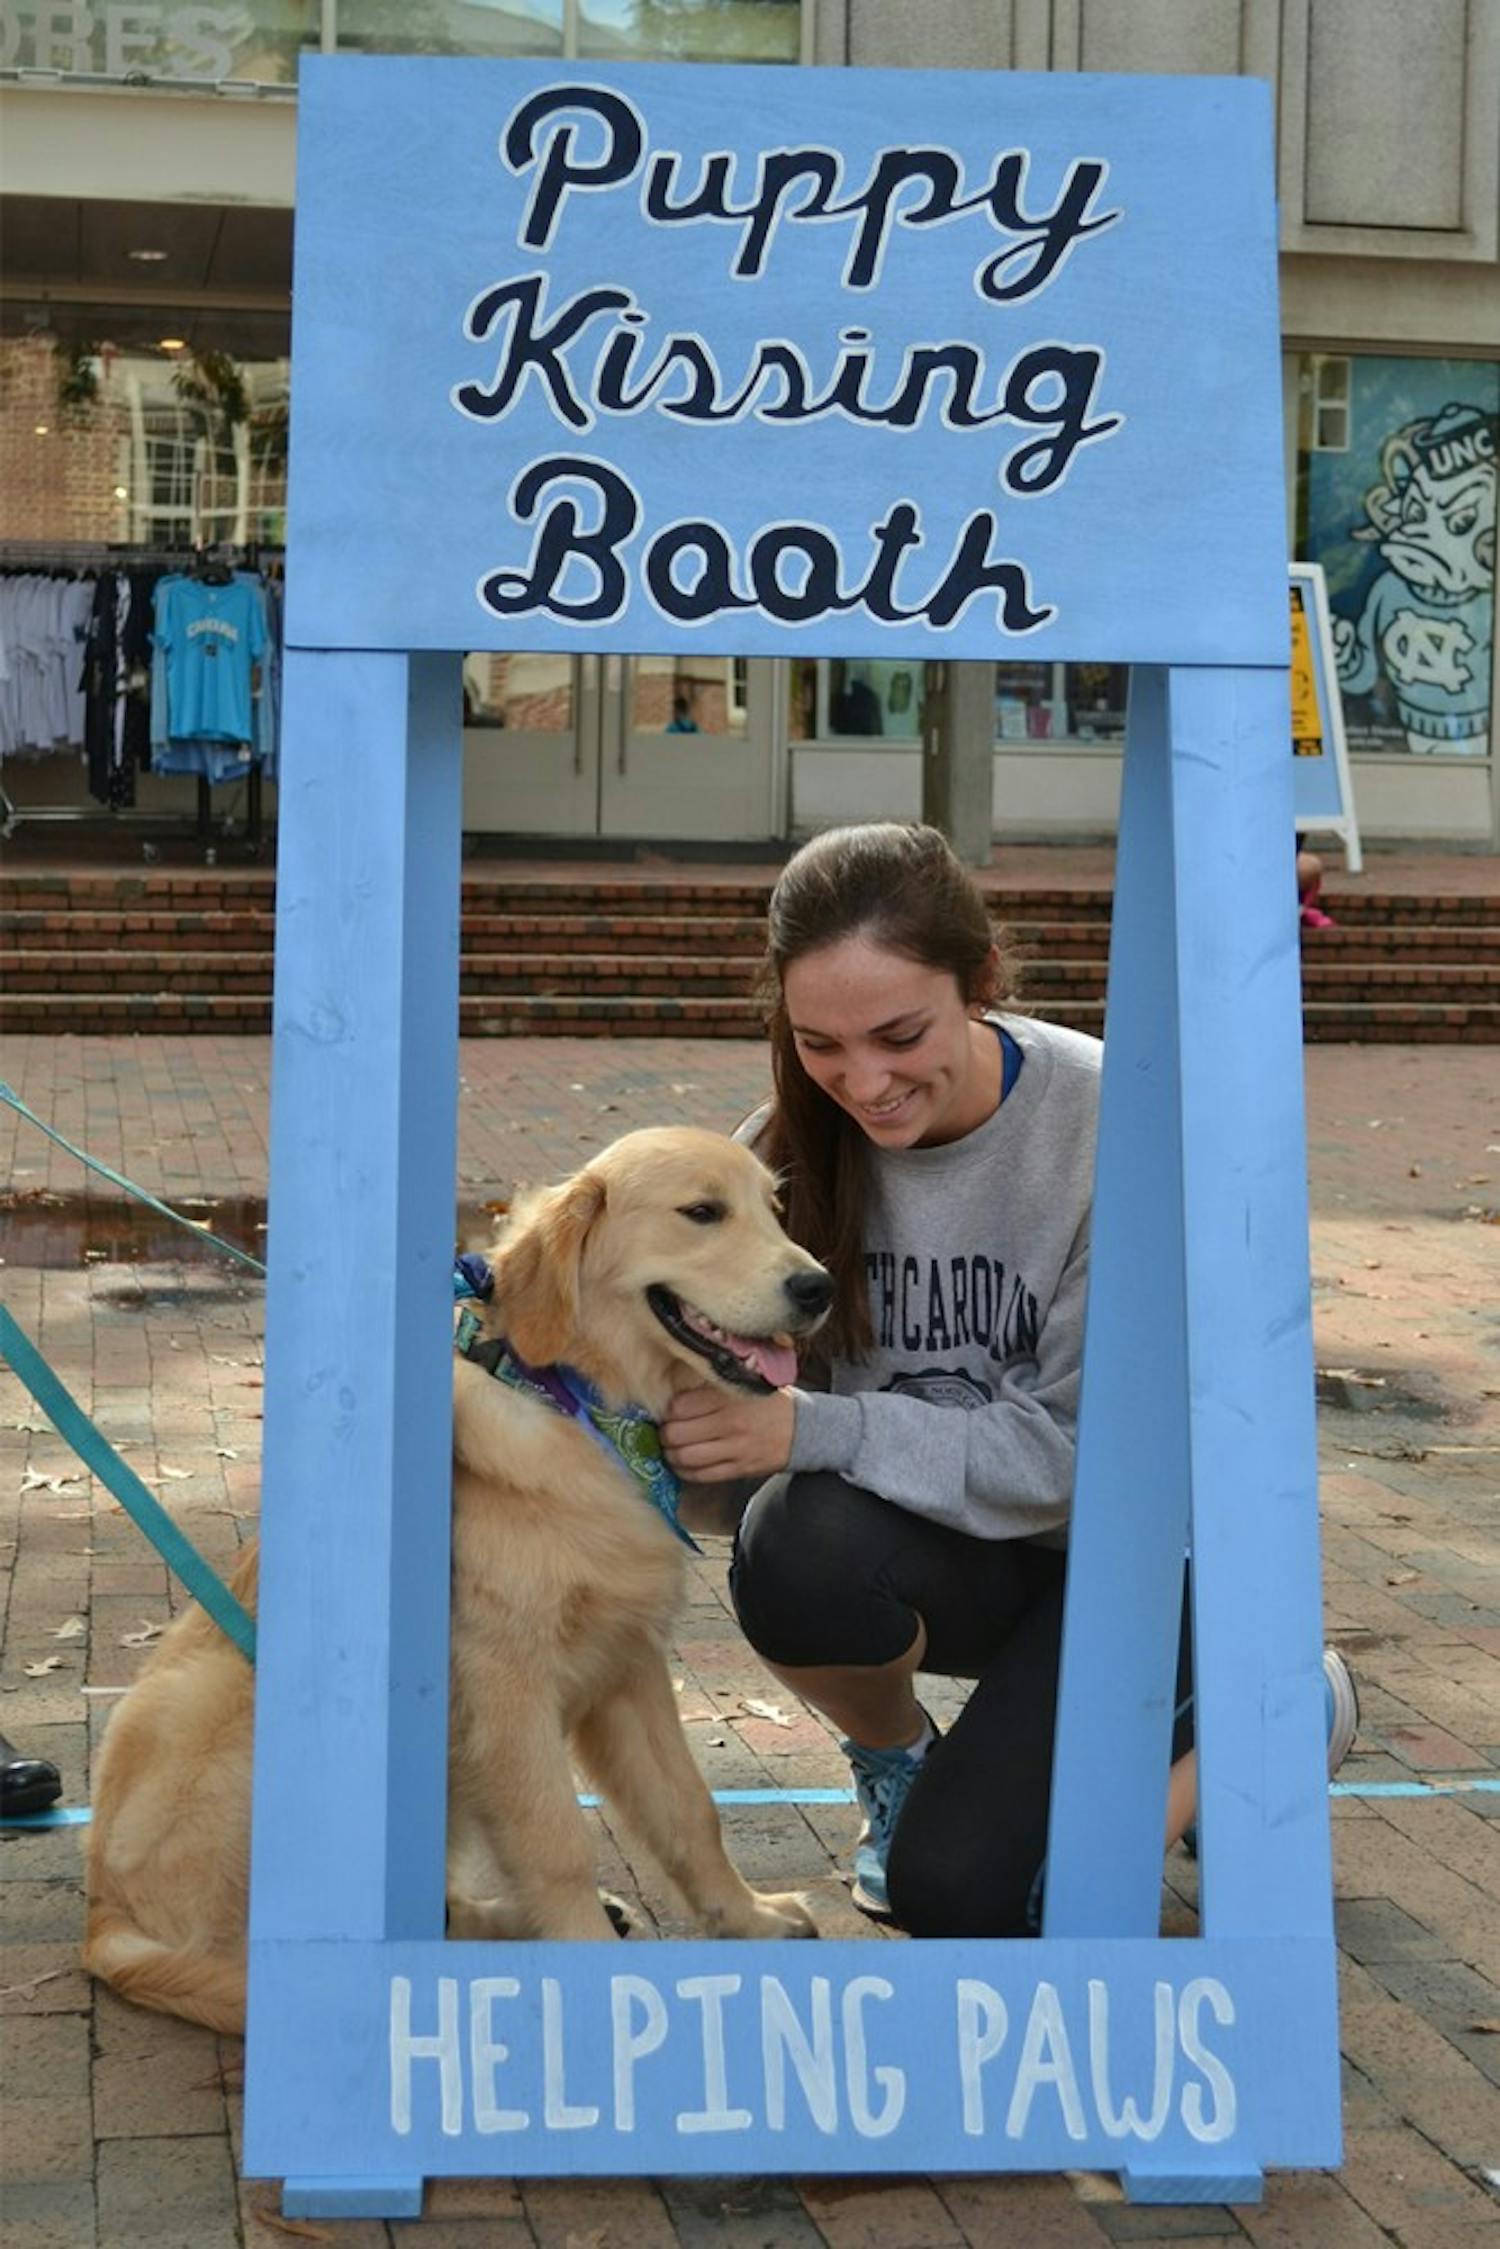 UNC junior Kirsten Wiedbusch shares a moment with Holden the Golden Retriever at the Helping Paws Puppy Kissing Booth.